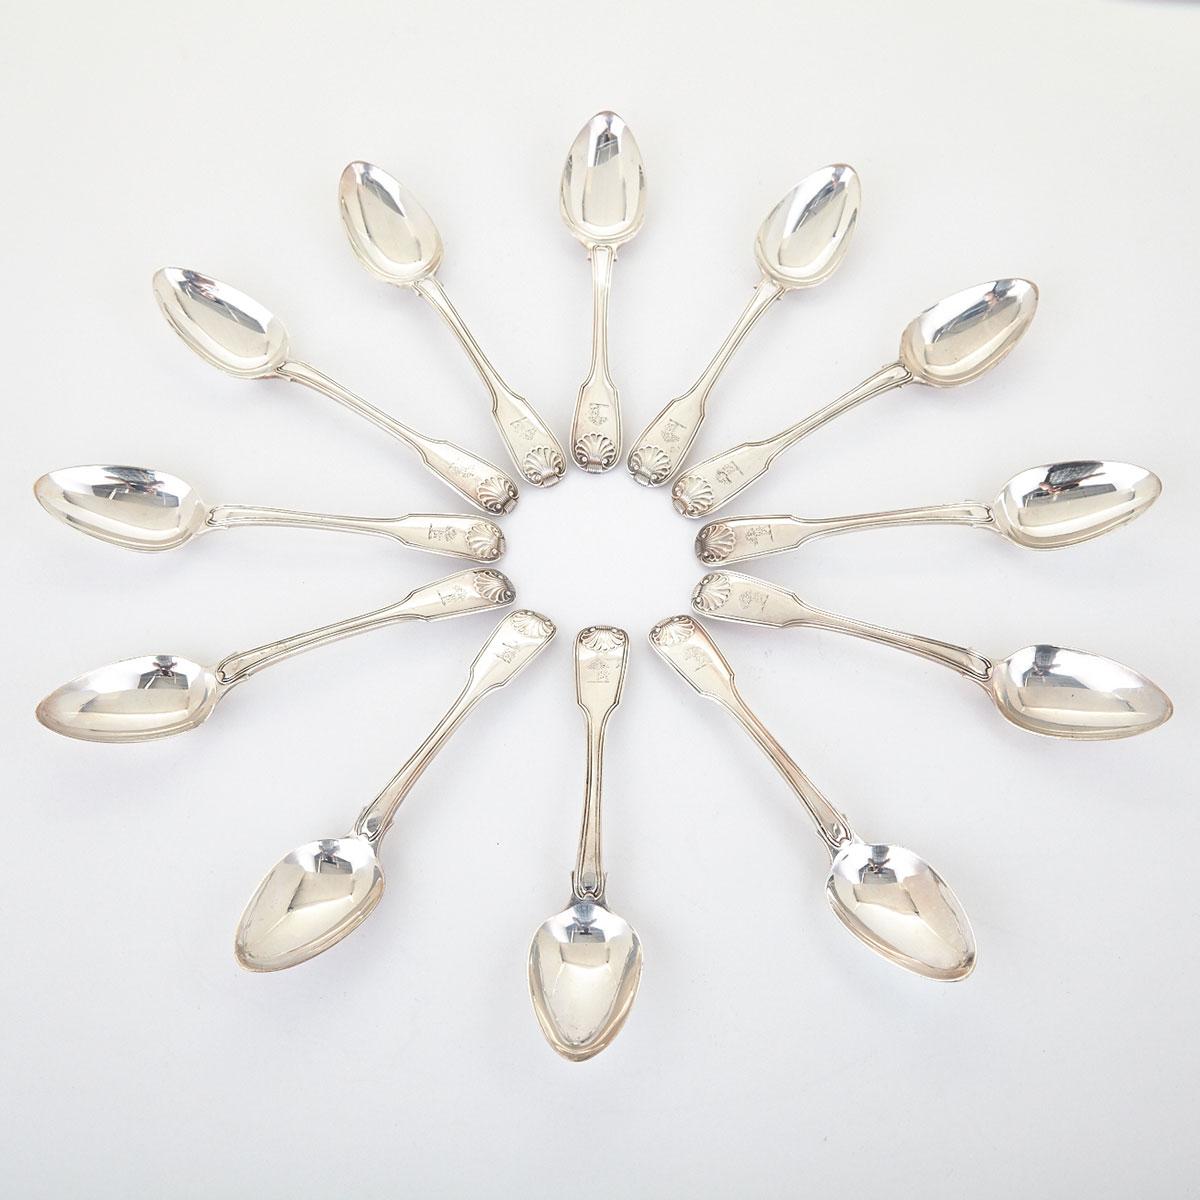 Set of Twelve George III Fiddle, Thread and Shell Pattern Dessert Spoons, William Eley, William Fearn & William Chawner, London, 1811